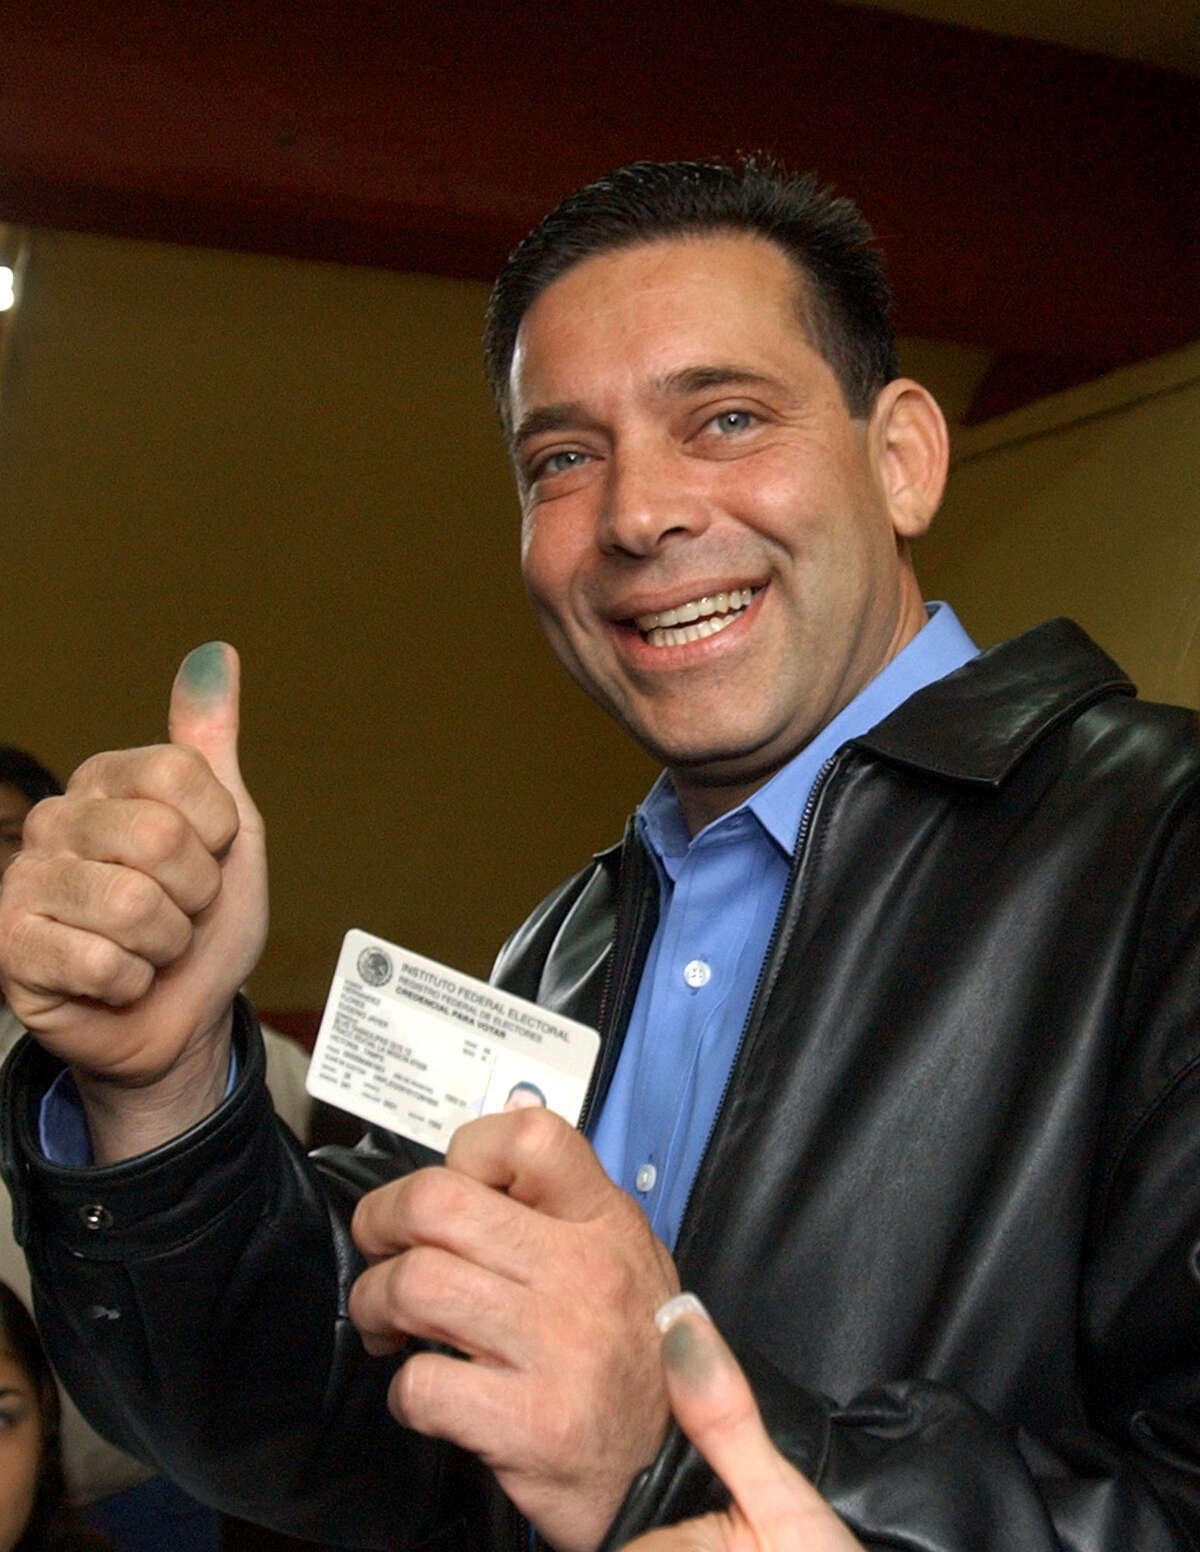 Institutional Revolutionary Party ( PRI) governor candidate for the state of Tamaulipas Eugenio Hernandez shows the ink on his finger after casting his vote Sunday, Nov. 14, 2004, in Ciudad Victoria, Mexico. Mexico's former ruling party was poised to extend its comeback this year in state elections, as residents of four states went to the polls to choose new governors on Sunday.